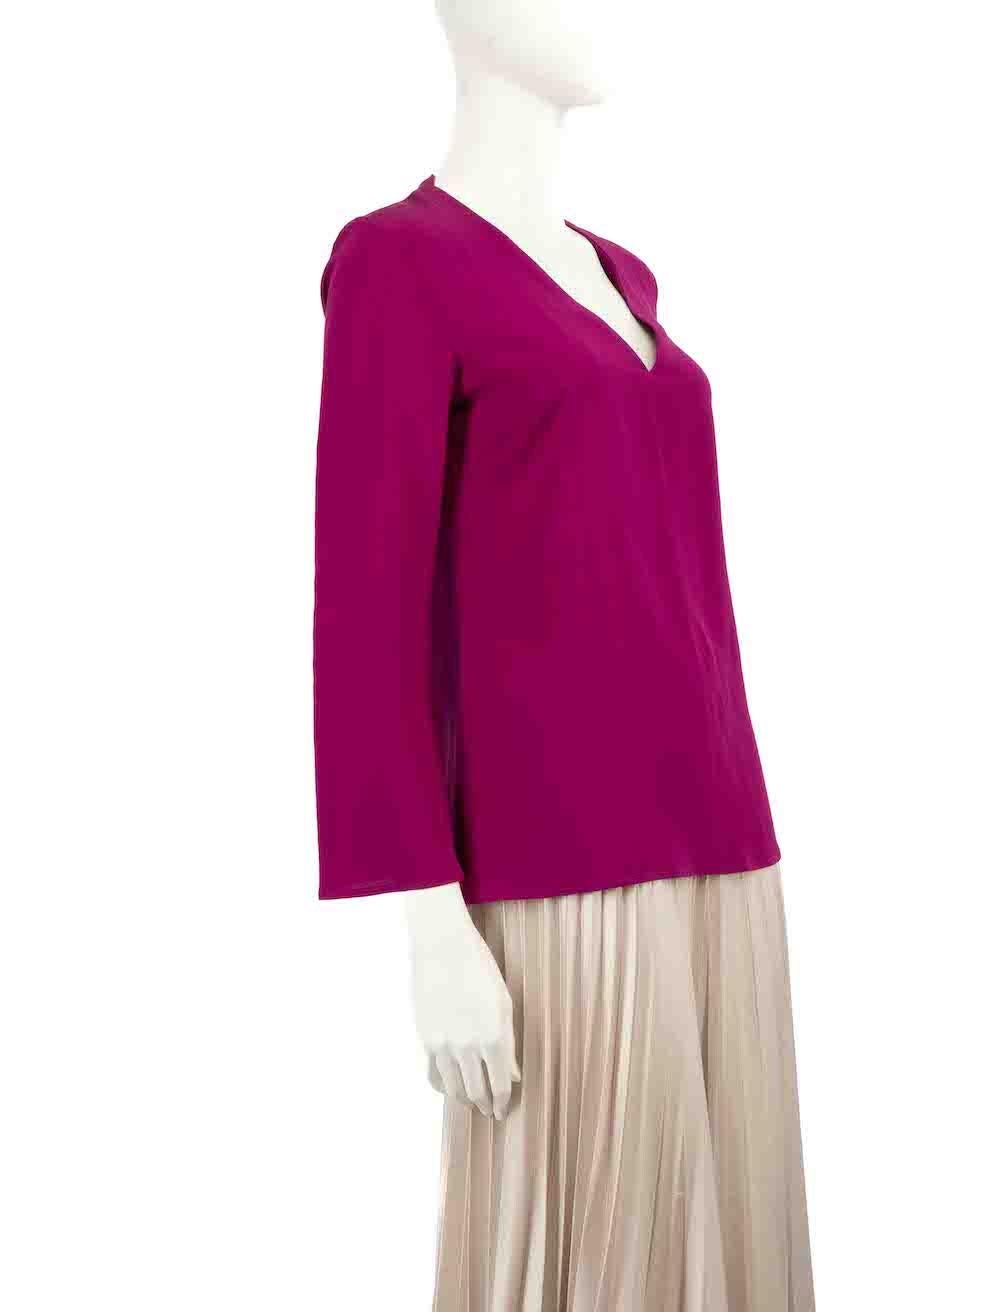 CONDITION is Very good. Hardly any visible wear to top is evident on this used Etro designer resale item.
 
 
 
 Details
 
 
 Fuchsia
 
 Silk
 
 Blouse
 
 Long sleeves
 
 V-neck
 
 
 
 
 
 Made in Italy
 
 
 
 Composition
 
 100% Silk
 
 
 
 Care